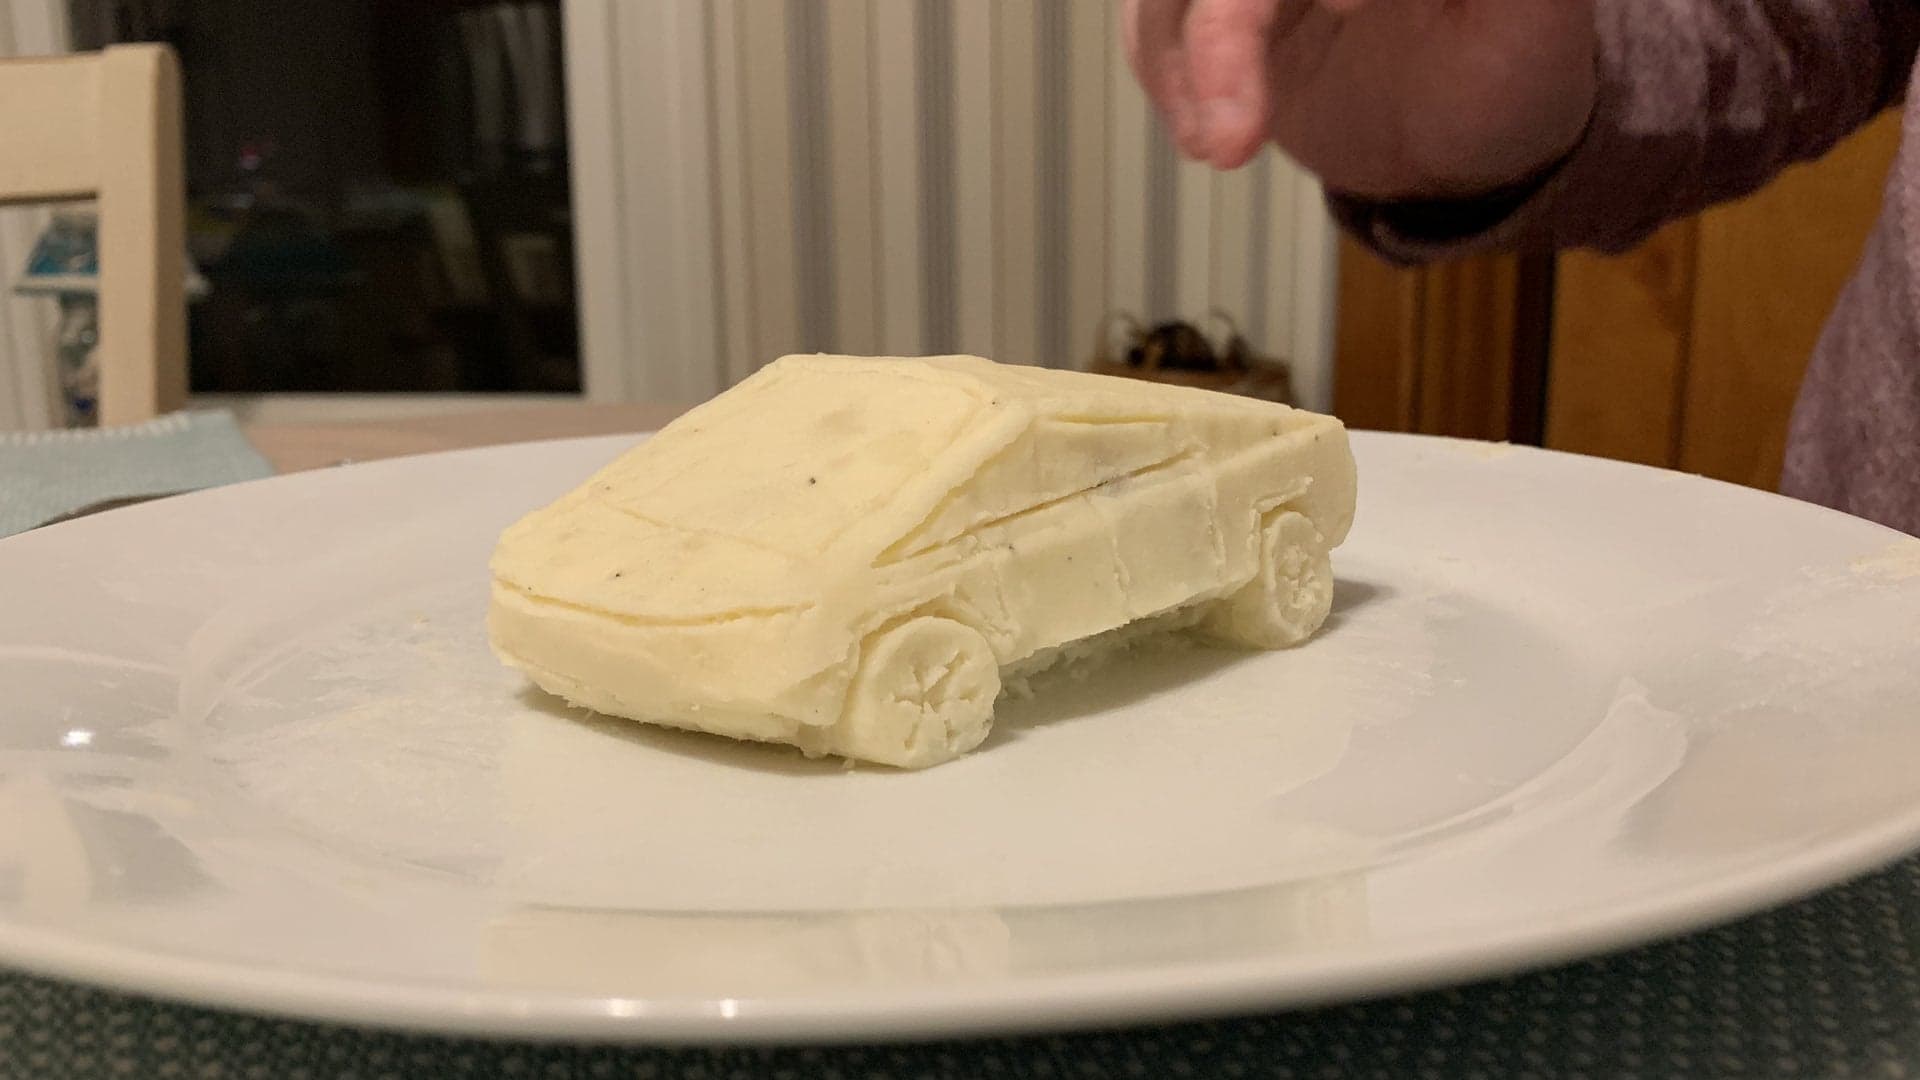 Man Wins Thanksgiving Dinner by Sculpting Tesla Cybertruck Out of Mashed Potatoes